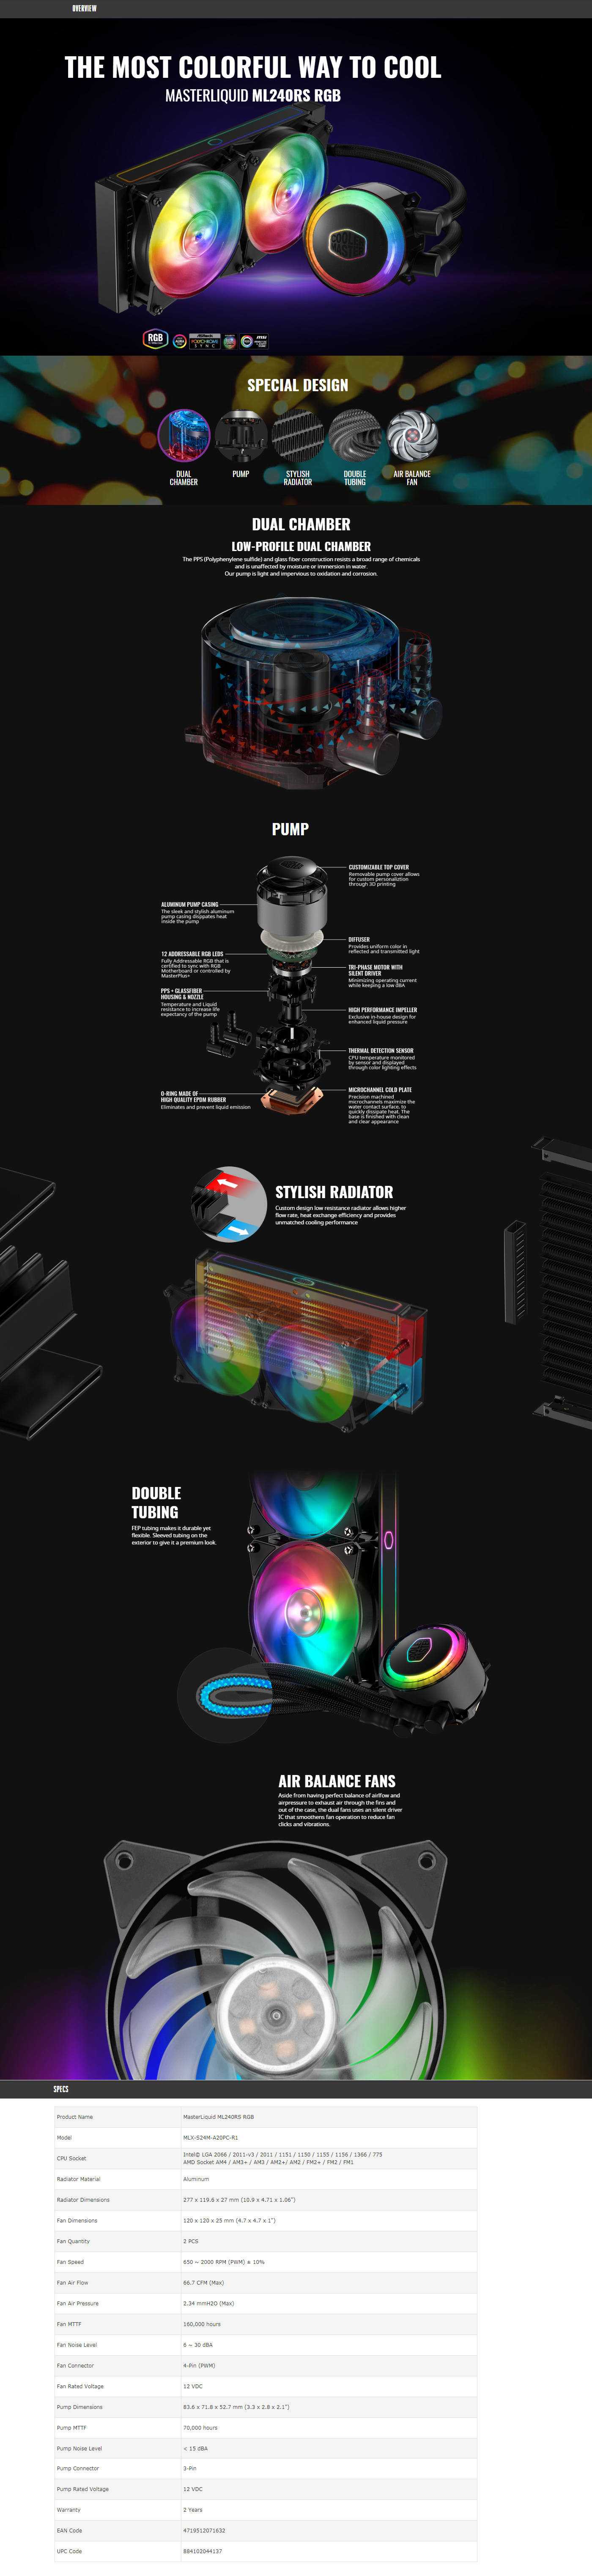  Buy Online Cooler Master MasterLiquid ML240RS RGB Cooler (MLX-S24M-A20PC-R1)